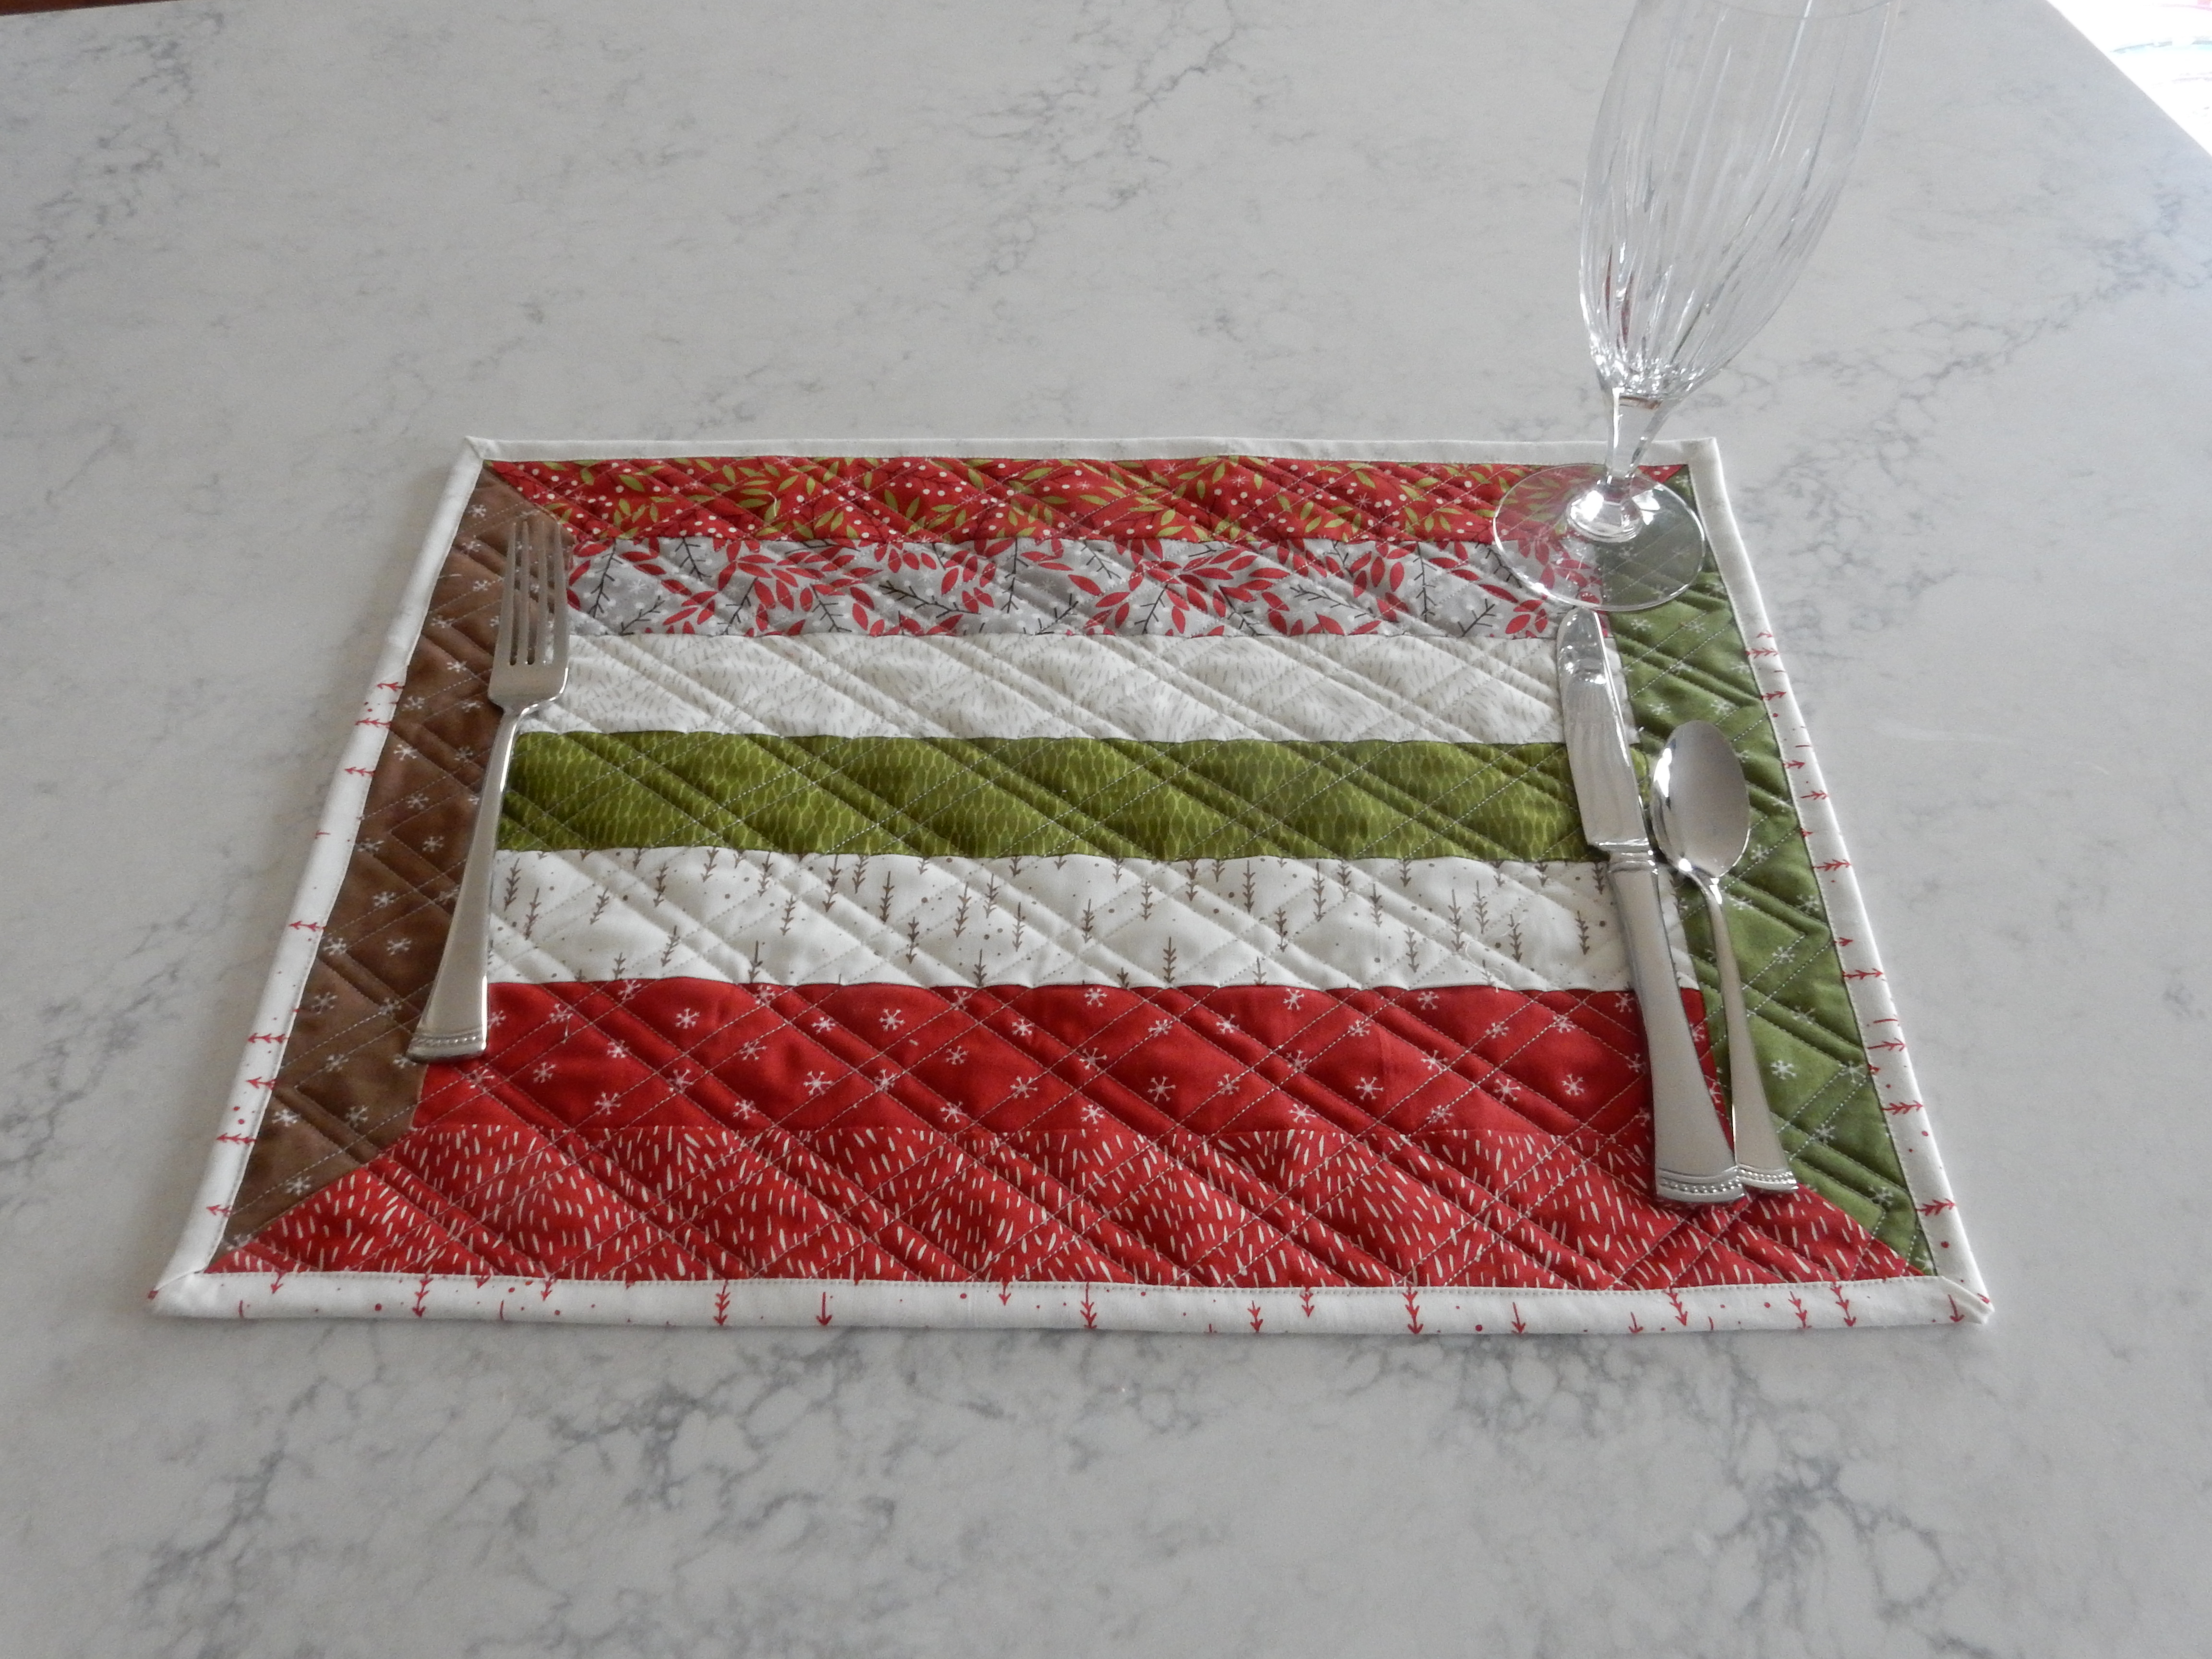 Quilt-As-You-Go Placemats! Fast & simple project that makes great